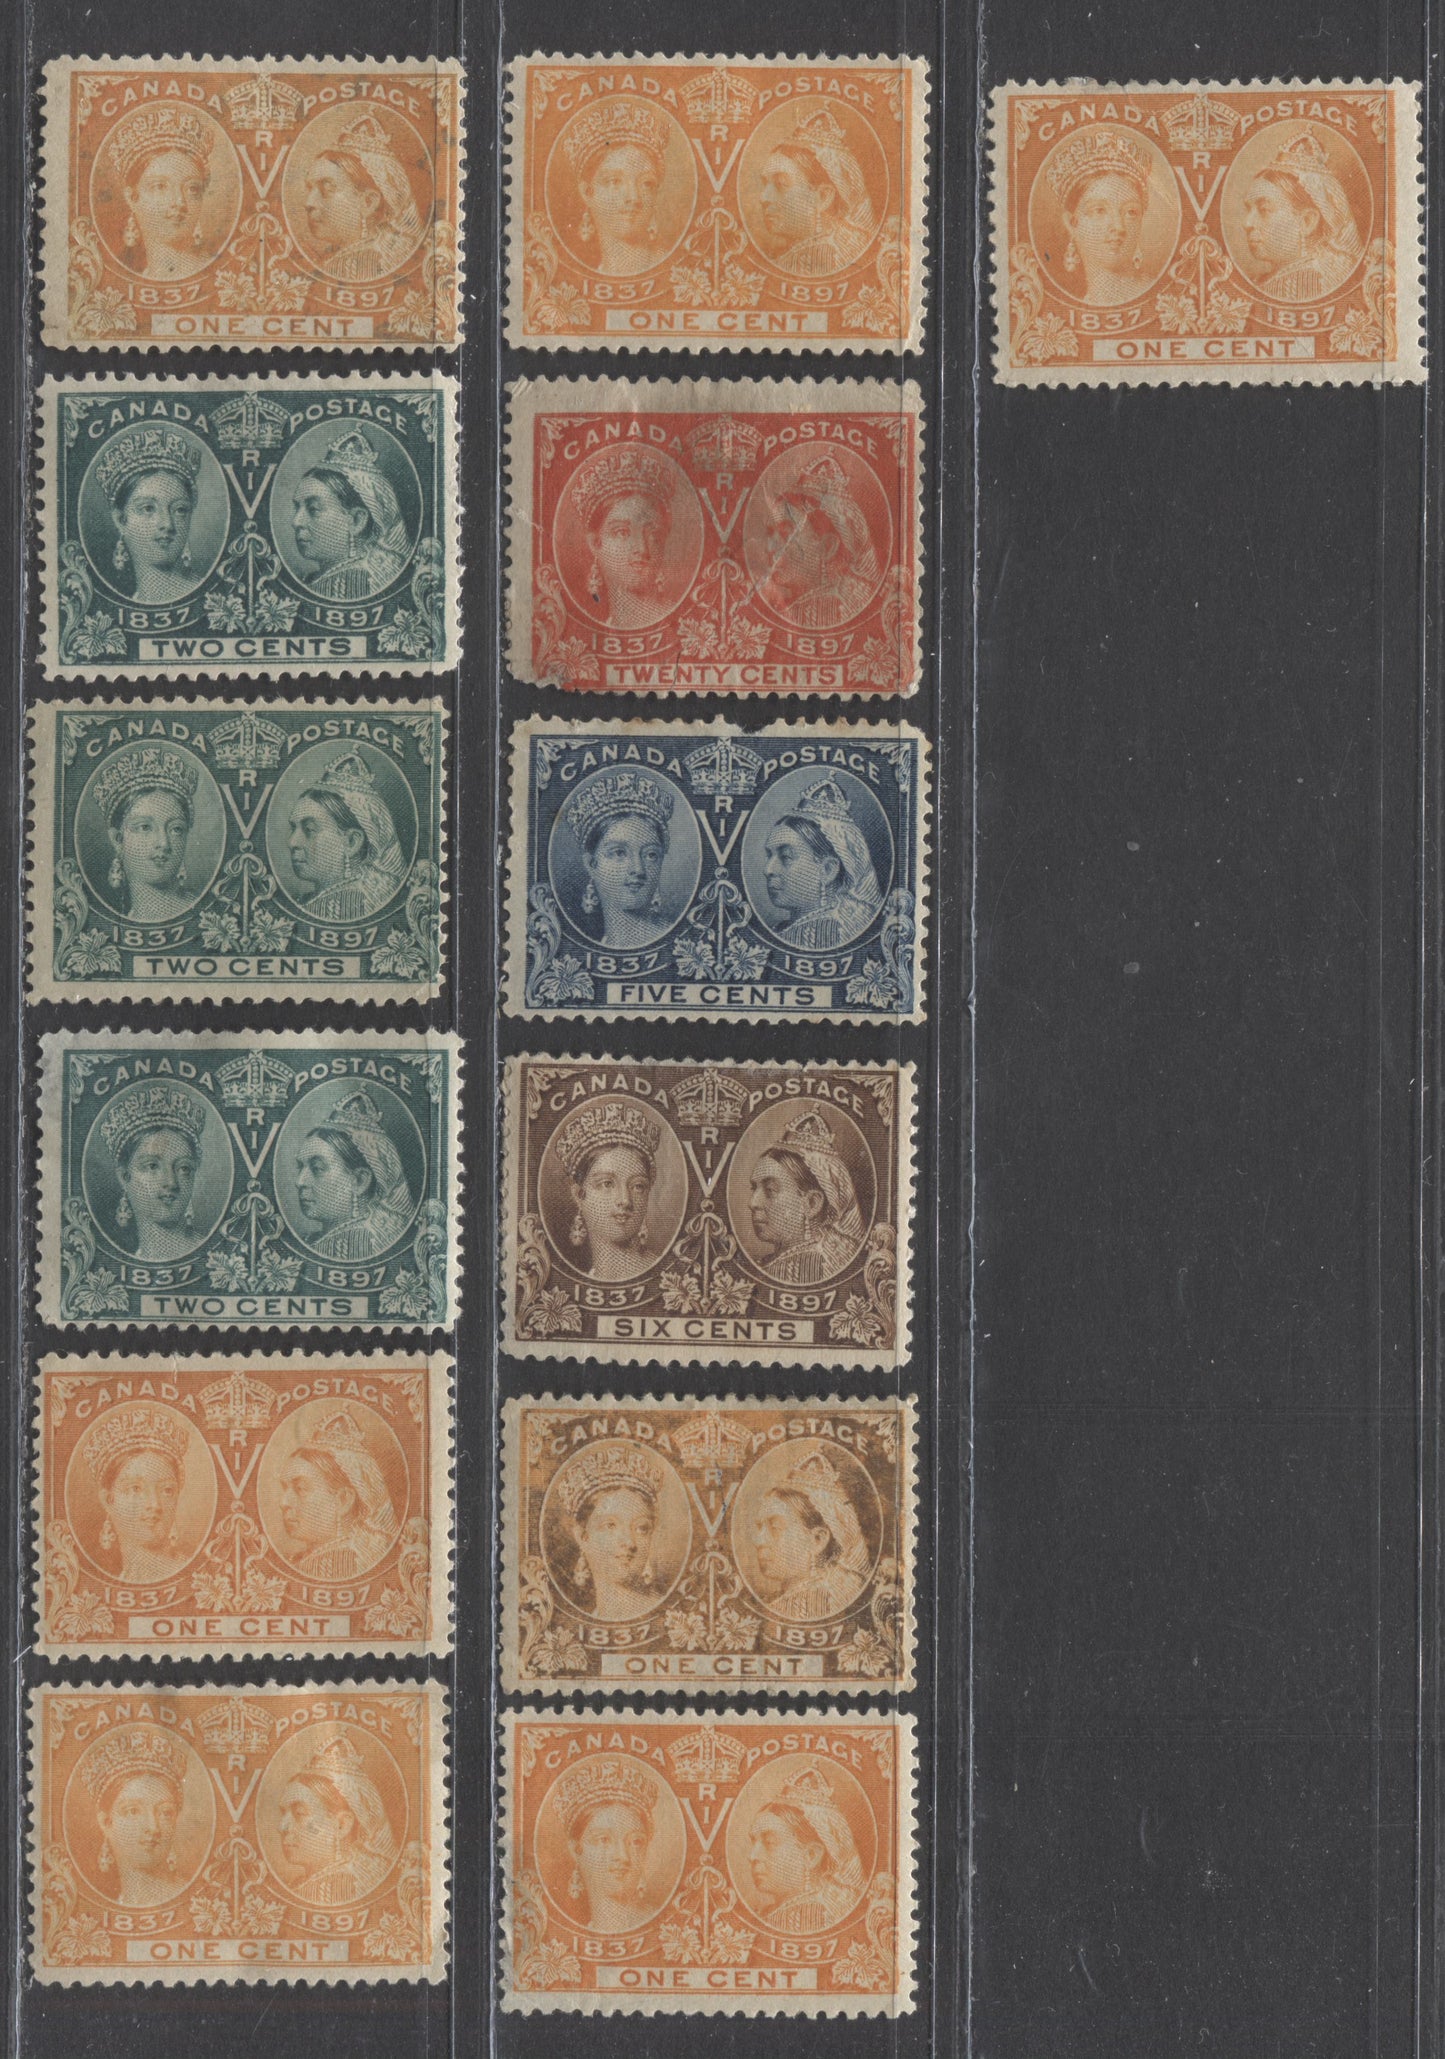 Lot 75 Canada #51/59i 1c-20c Orange-Deep Vermillion Queen Victoria, 1897 Diamond Jubilee Issue, An Ungraded Sudy Lot of 13 Mint Stamps